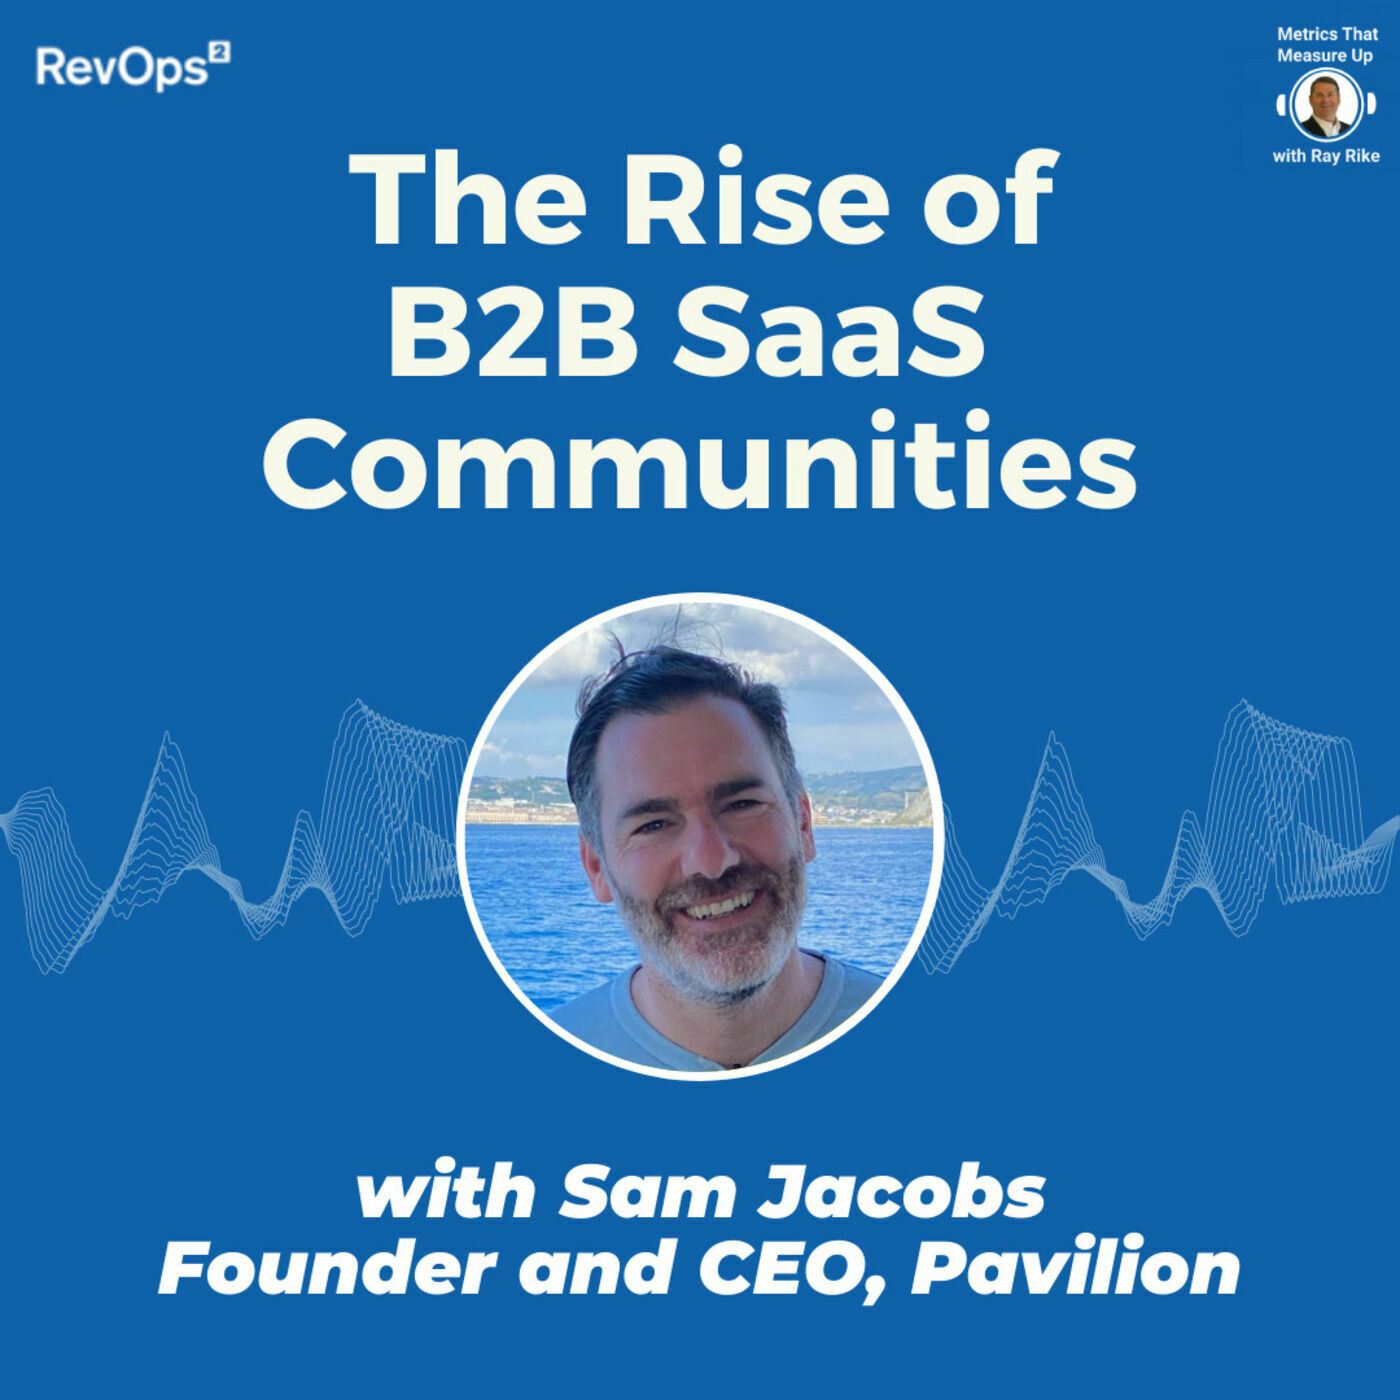 The Rise of B2B SaaS Communities with Sam Jacobs, Founder and CEO of Pavilion